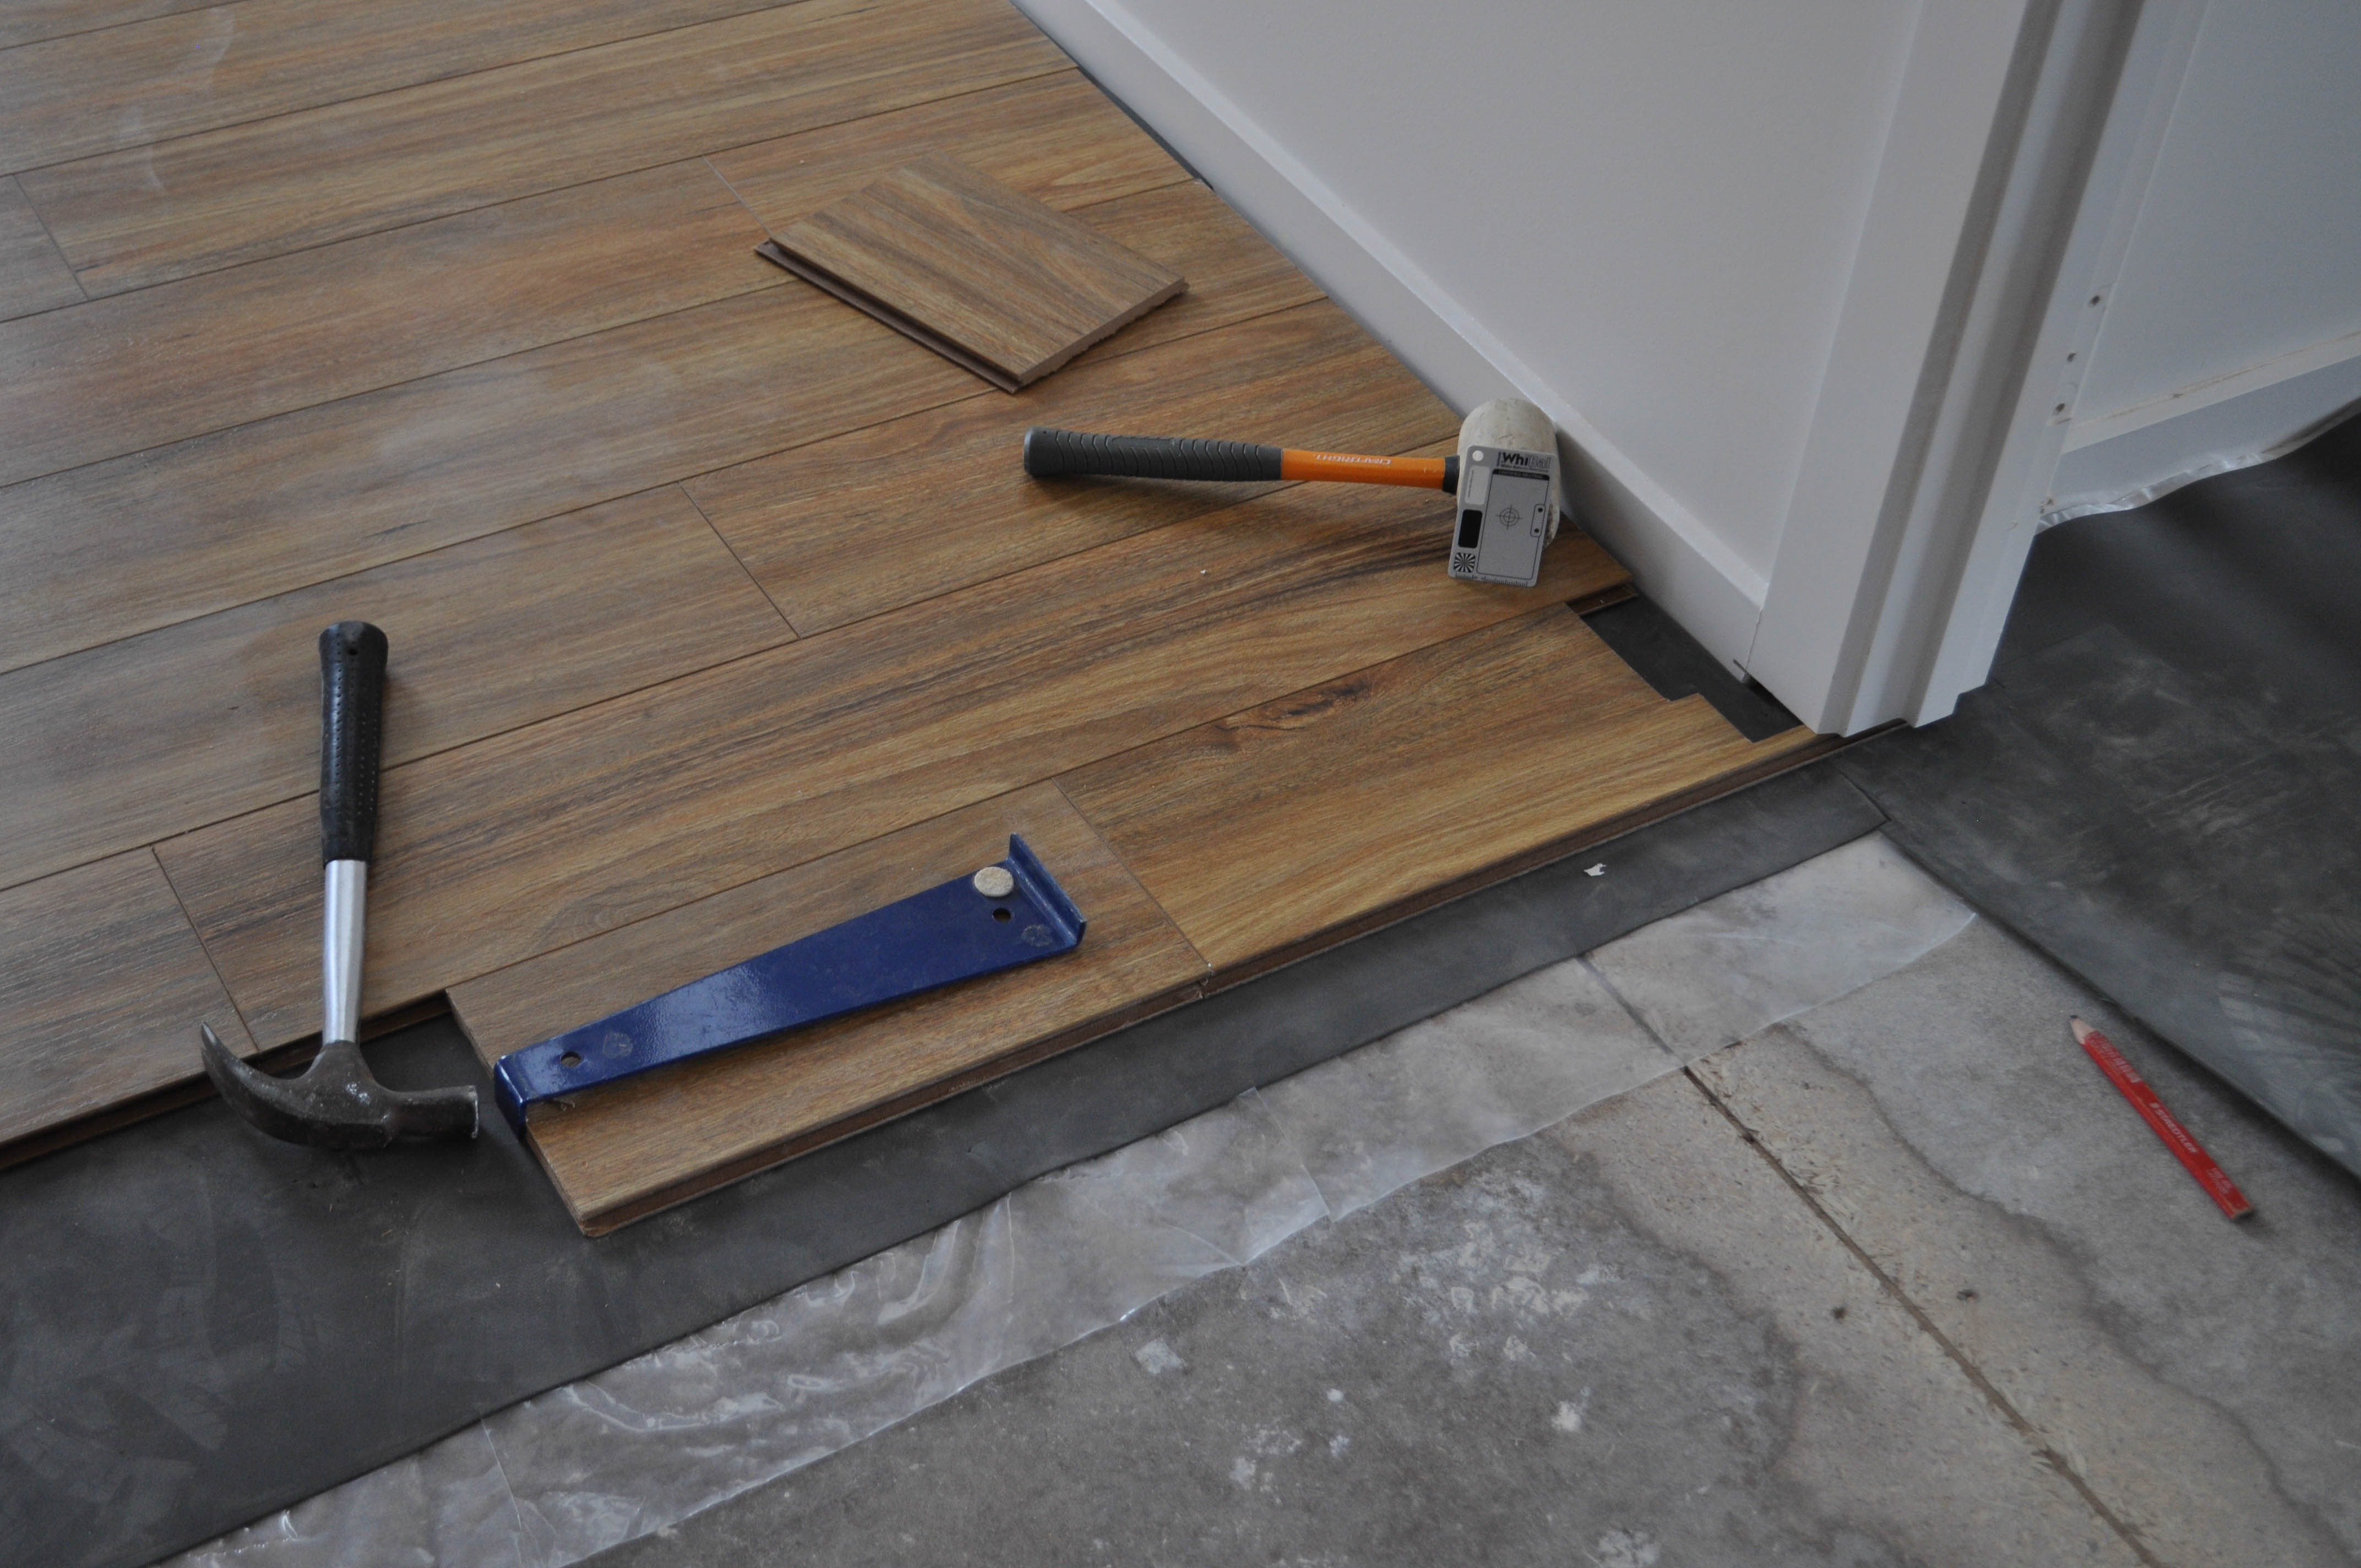 shows a door jamb, in a room, that has being undercut by an undercutting saw to create a cavity which will receive the laminate floorboard.
 The floorboard has been notched to fit smuggly inside this cavity so that the required expansion gap between the perimeter of the floorboard and the timber framework of the wall
 will be covered by the doorway architrave. The notched floorboard has been positioned, next to and facing the door jamb cavity, ready to be tapped iside the door jamb cavity. The picture
shows 12mm thick spotted gum laminated flooring being installed between two rooms in a house in the suburb of Point Cook, Werribee Vic 3030. On the floor boards is the tapping tool
with the boards are tapped into position and place and the hammer used for tapping. This is information as to how to install laminate flooring for the do it yourself floor 
board laminate flooring installer.